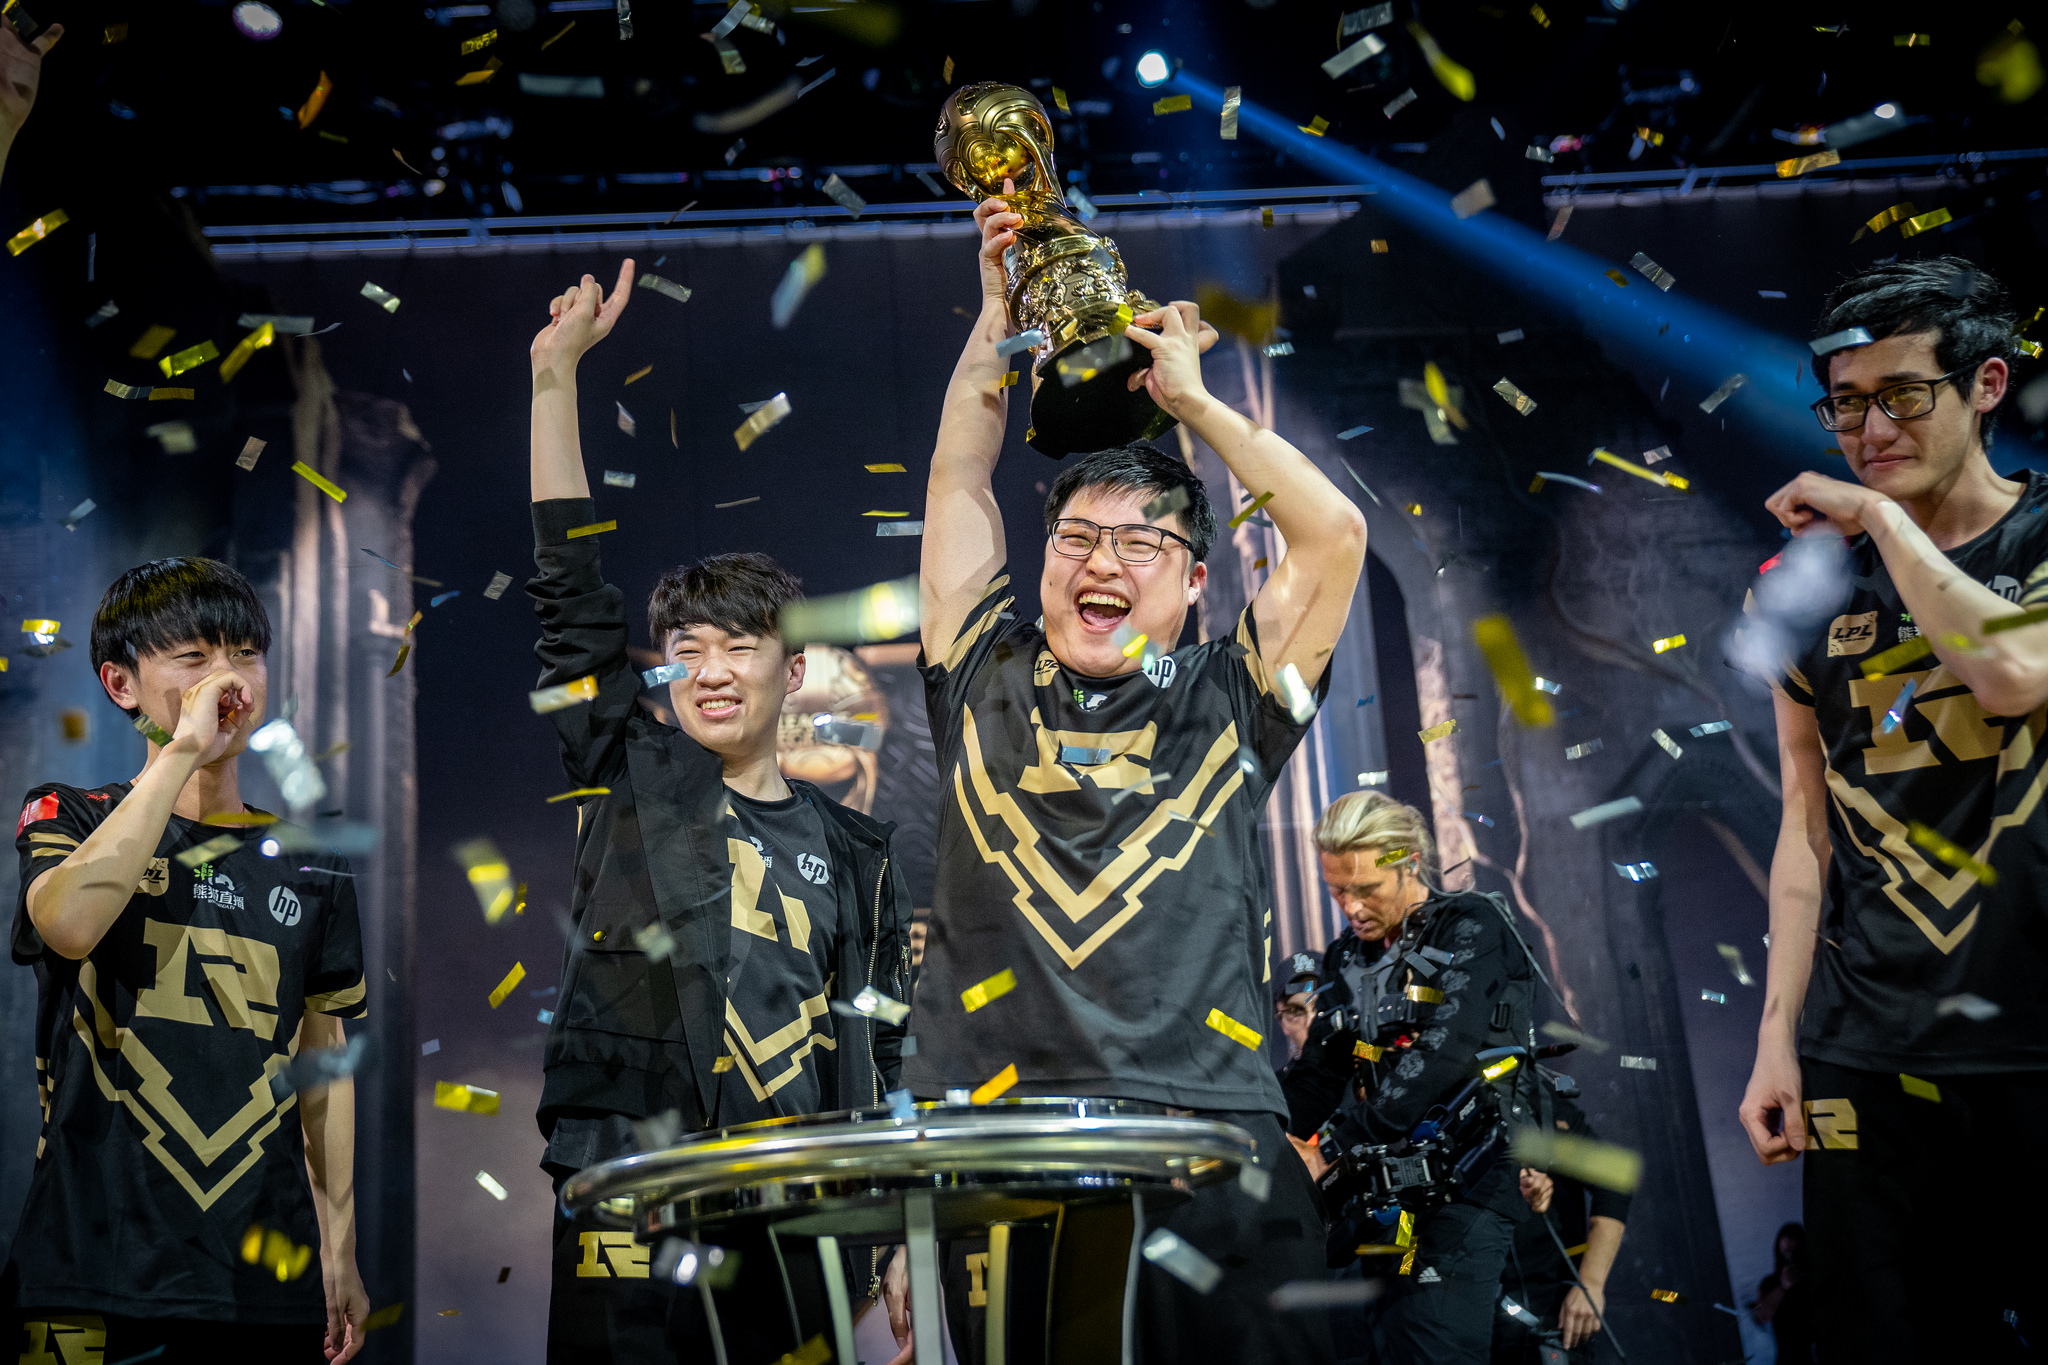 Uzi finally meets his destiny by claiming the MSI crown with RNG - Dot Esports